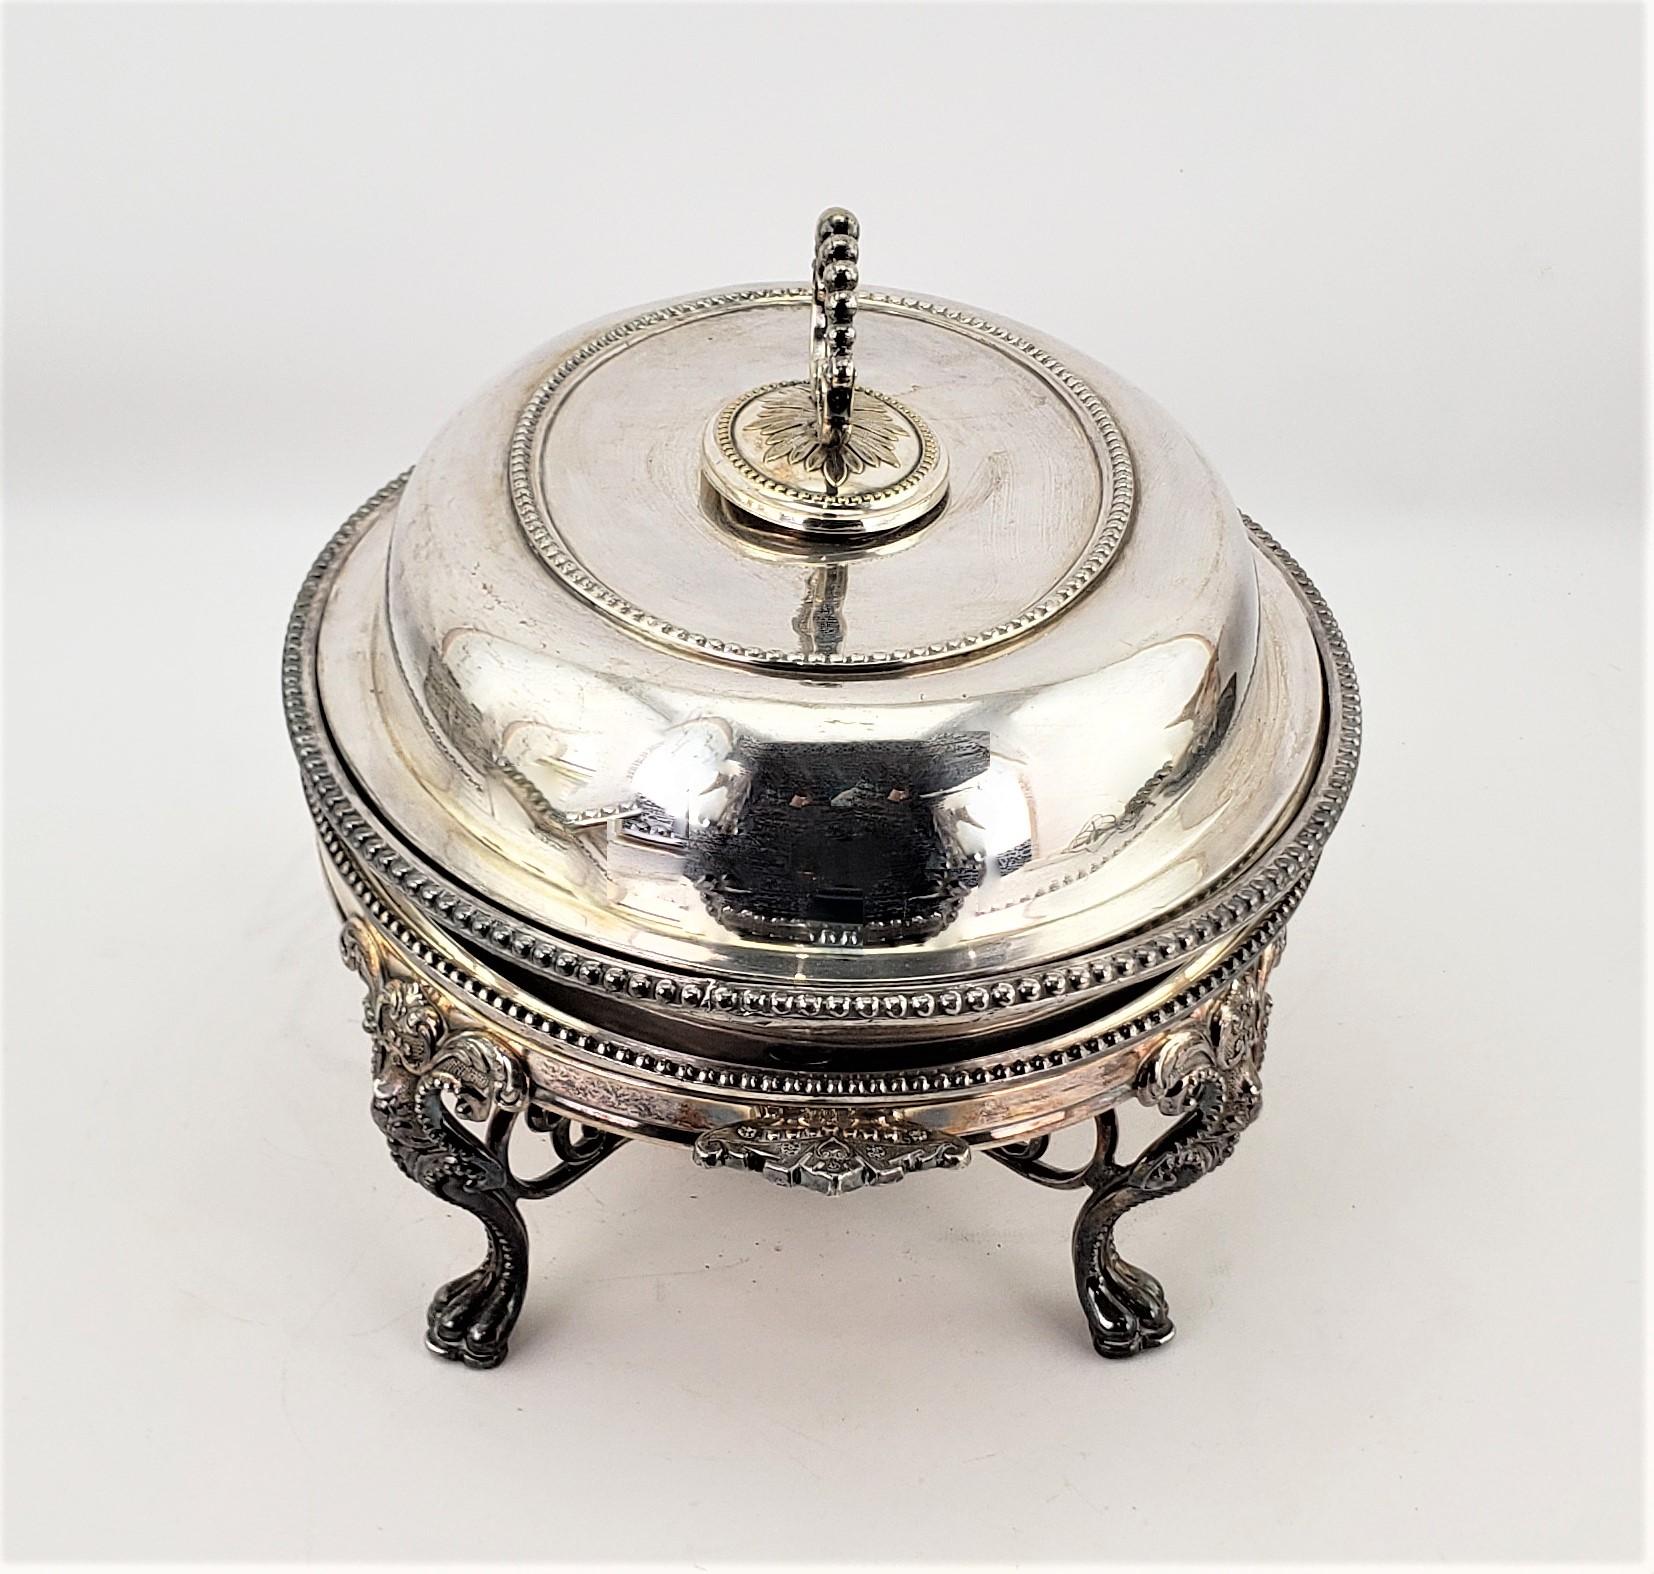 Machine-Made Antique Reed & Barton Silver Plated Covered Warm Food Server or Chafing Dish